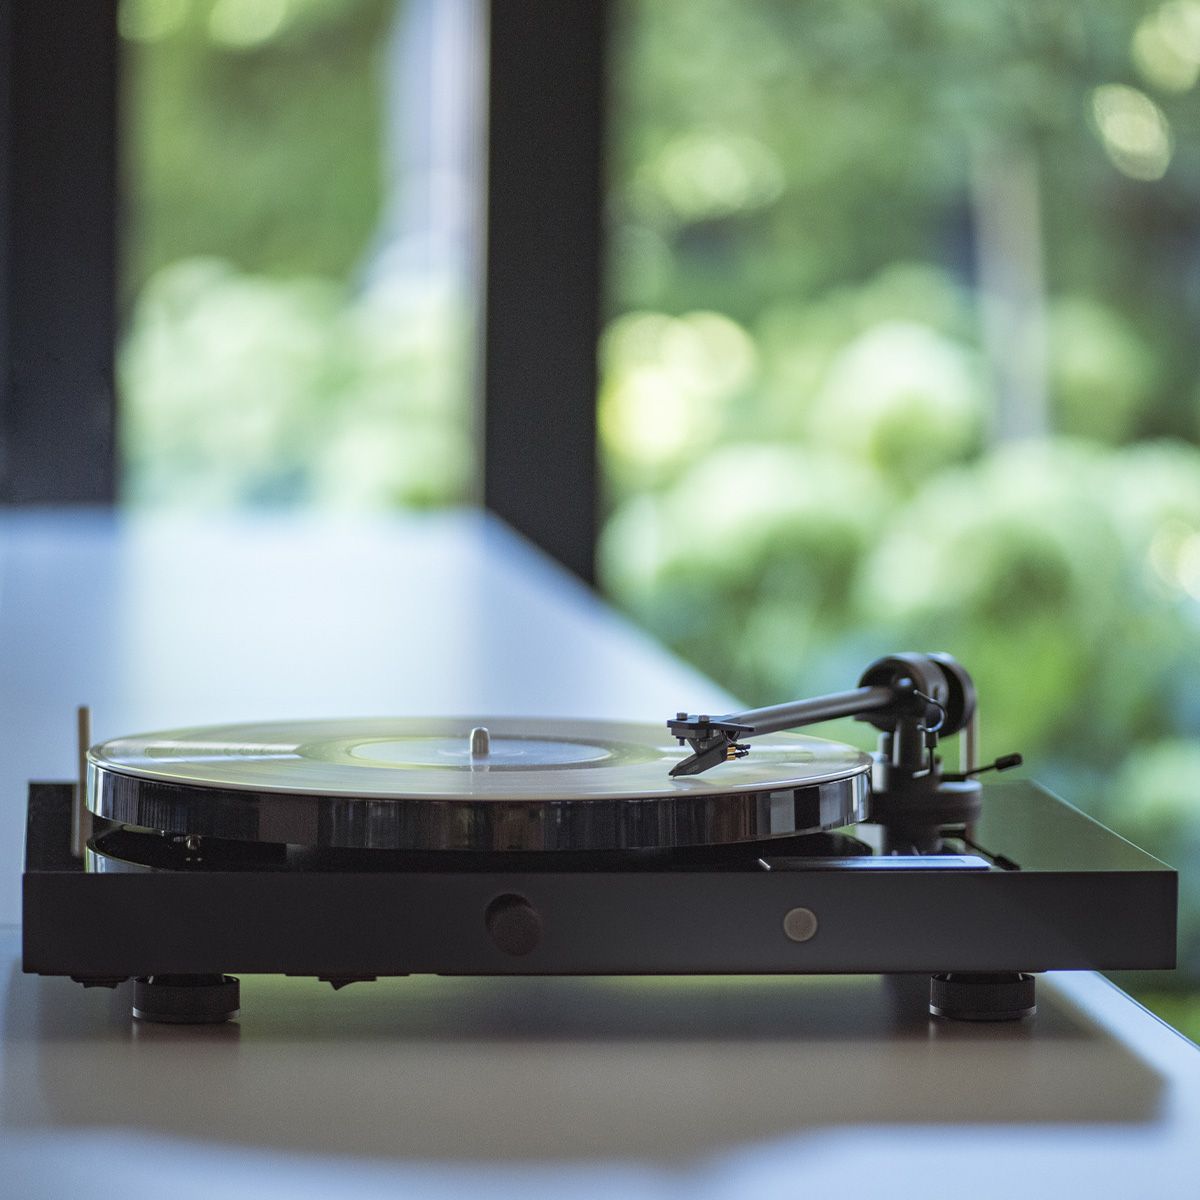 Pro-Ject Juke Box E1 Turntable in black sitting on a table